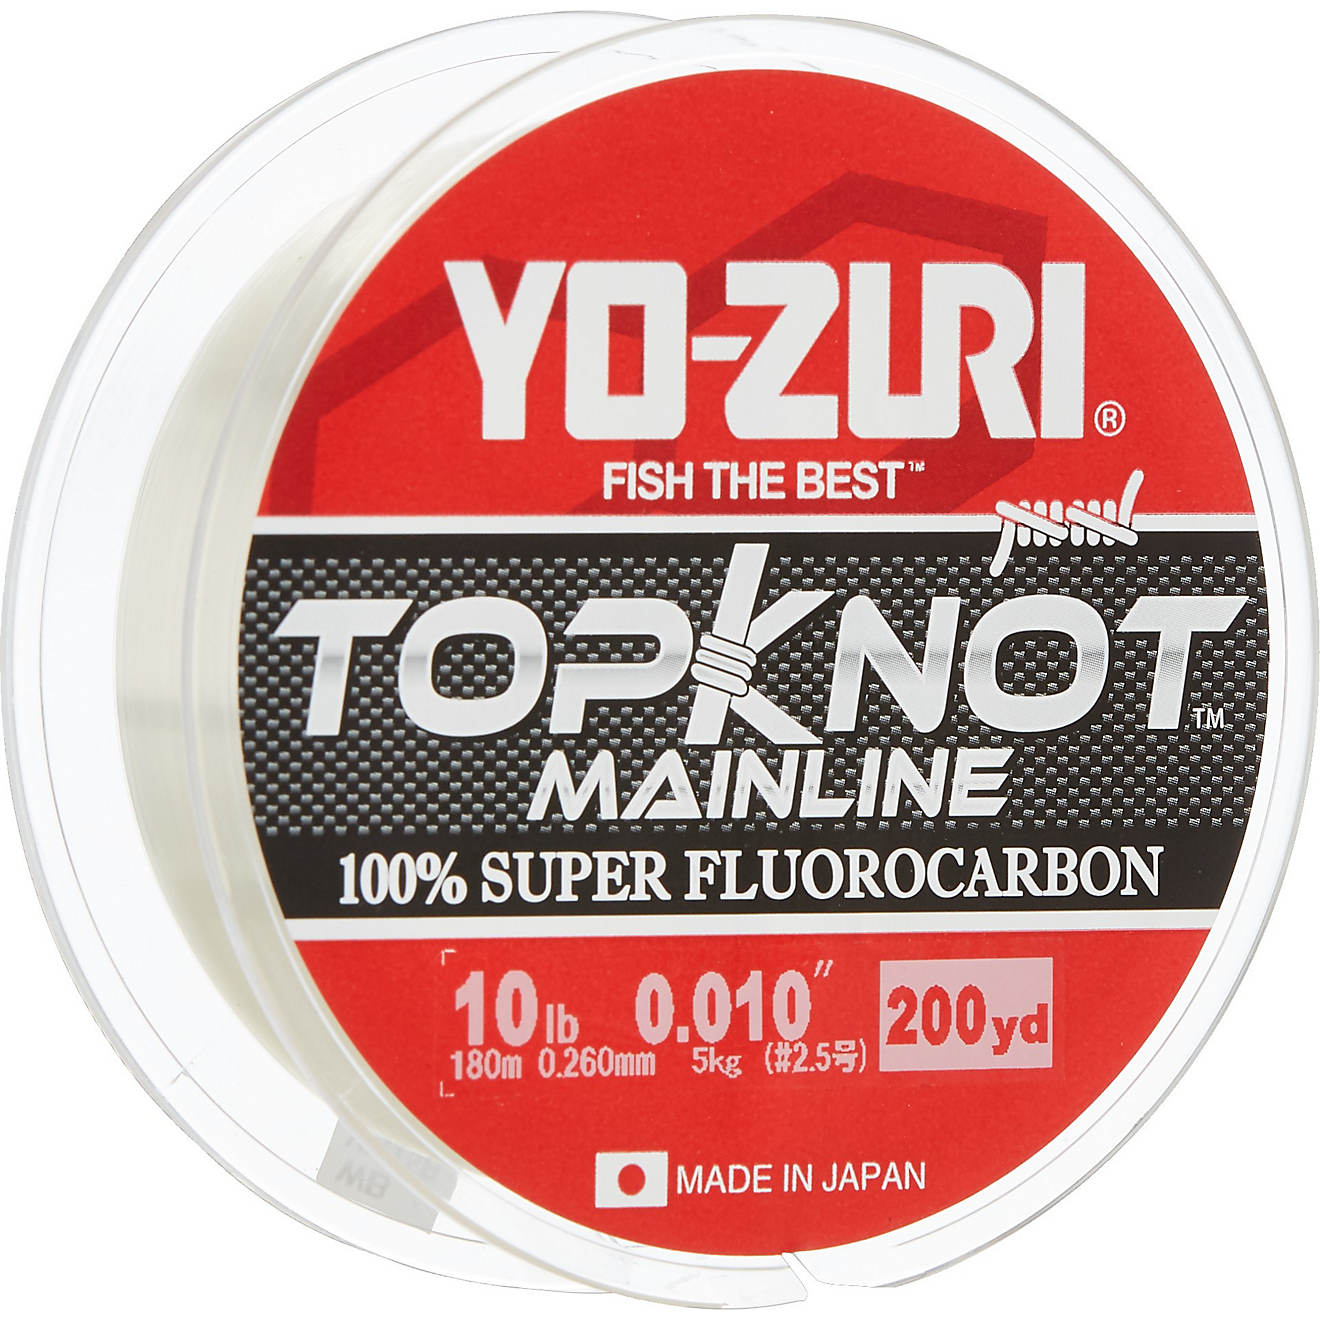 Yo-Zuri TopKnot MainLine Natural Clear 200 Yards Fluorocarbon Fishing Line 